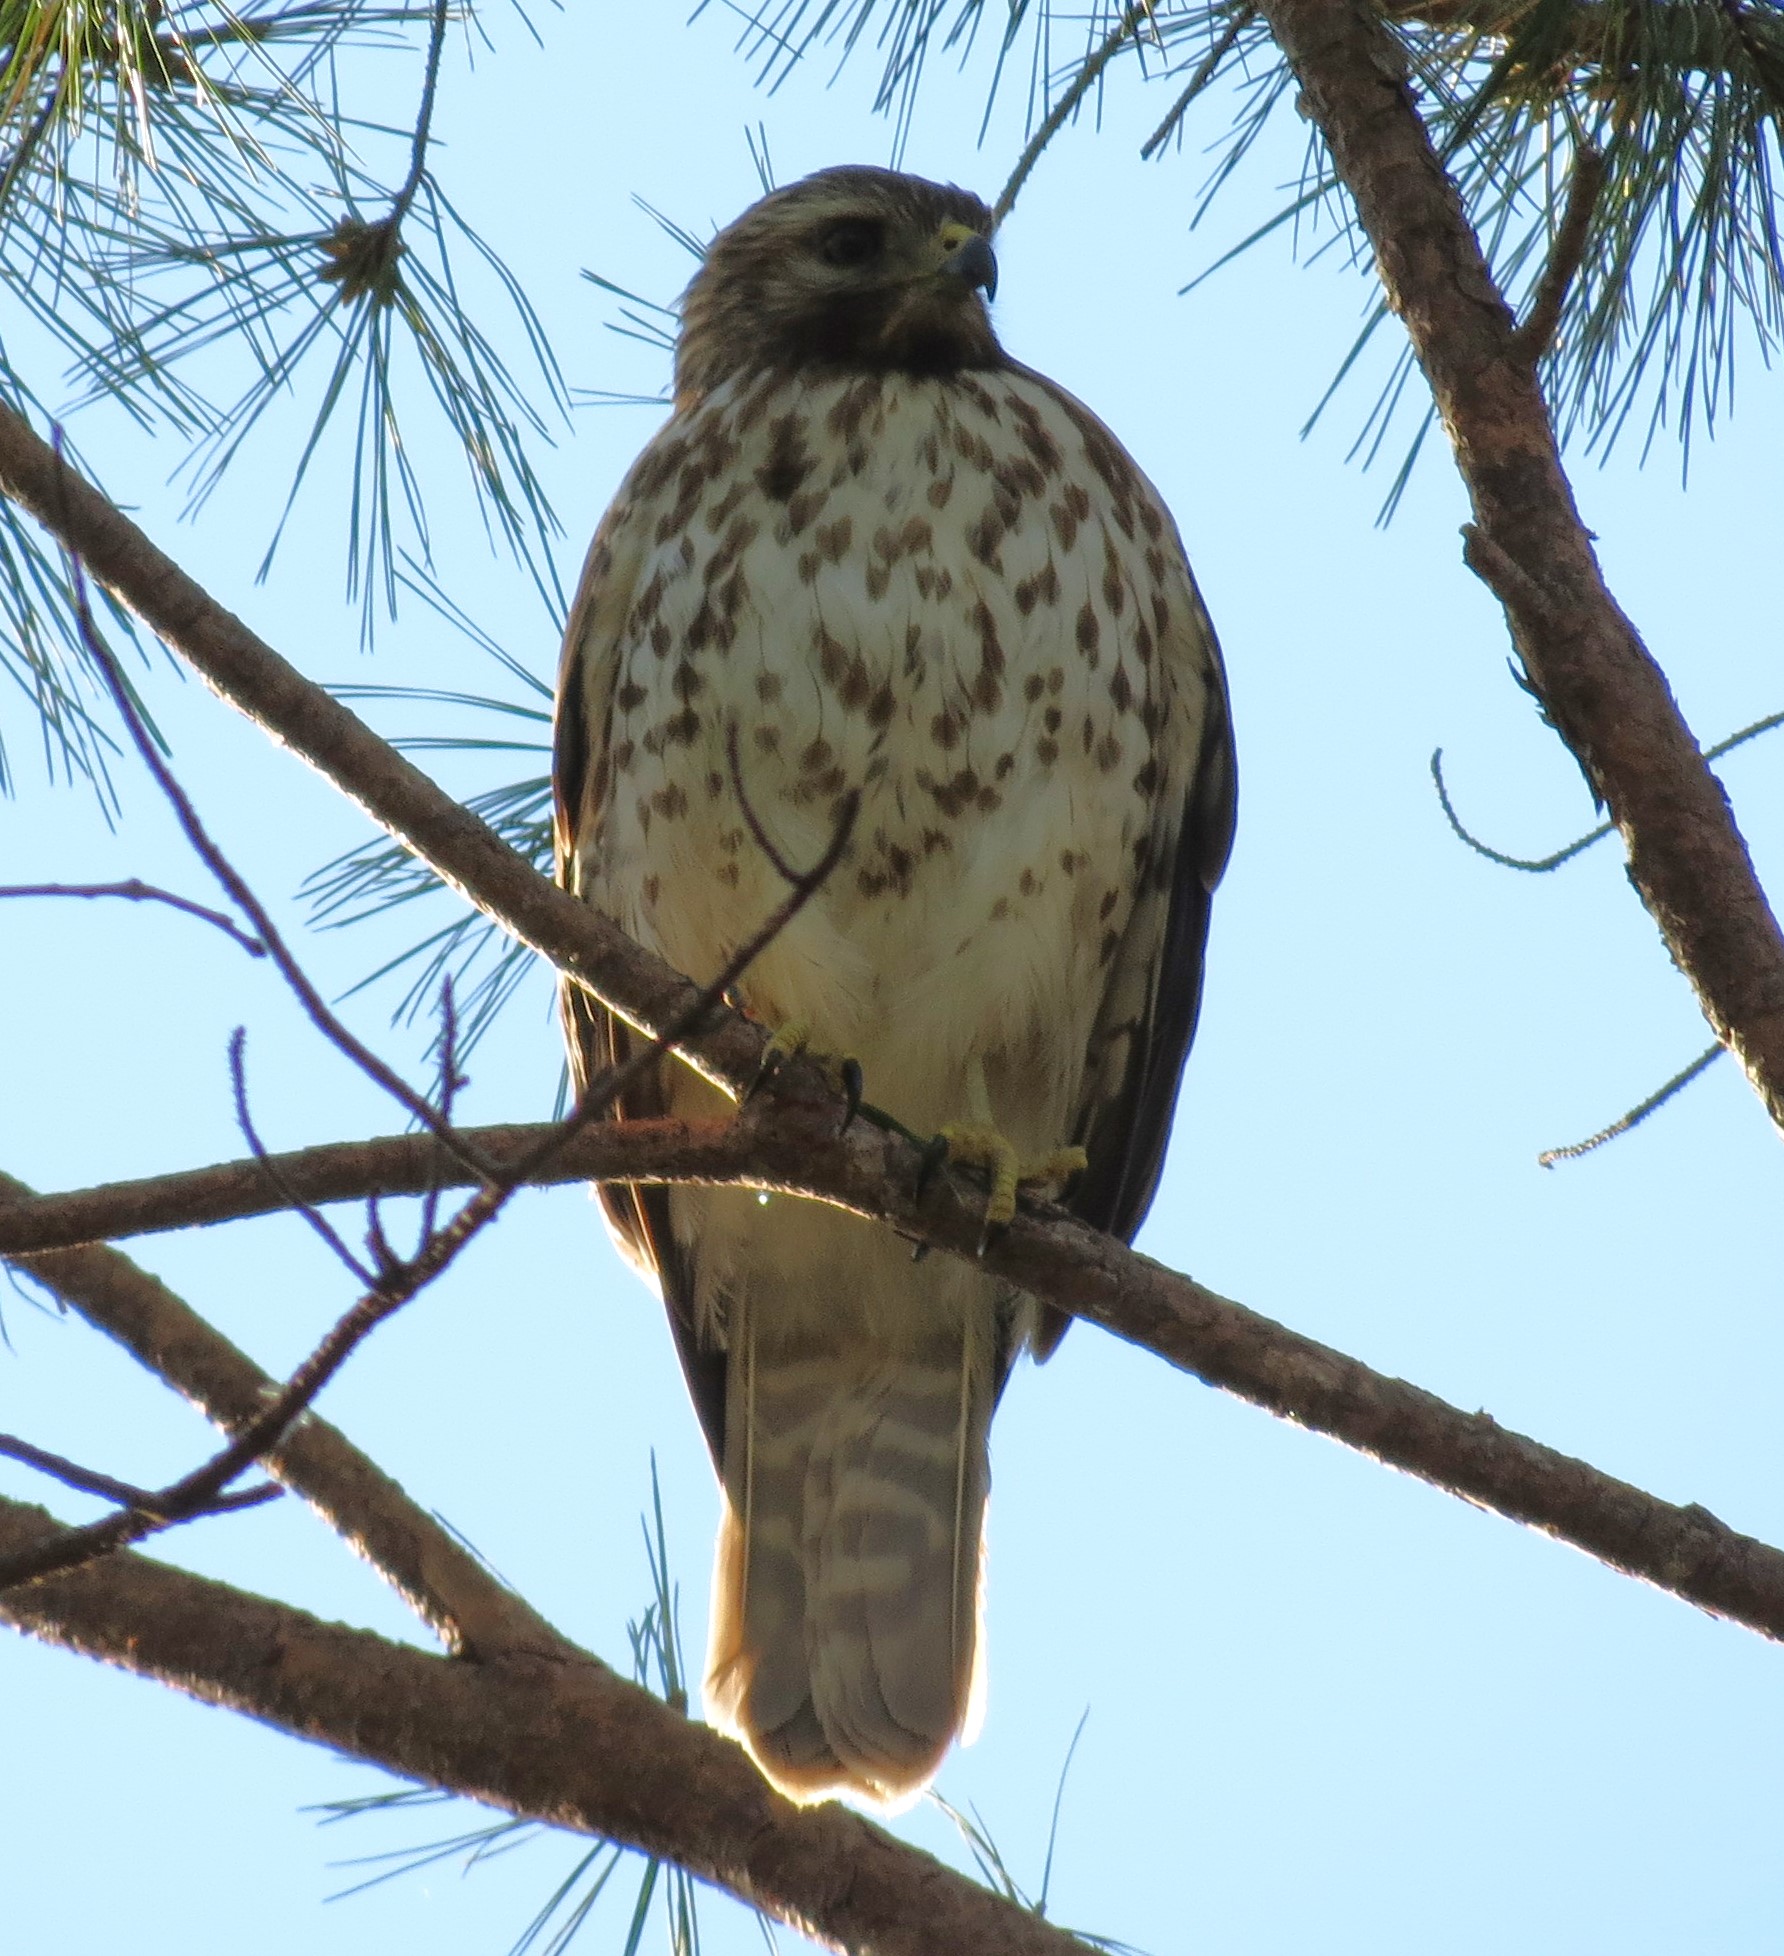 The hawk is perched on a pine branch, facing the camera